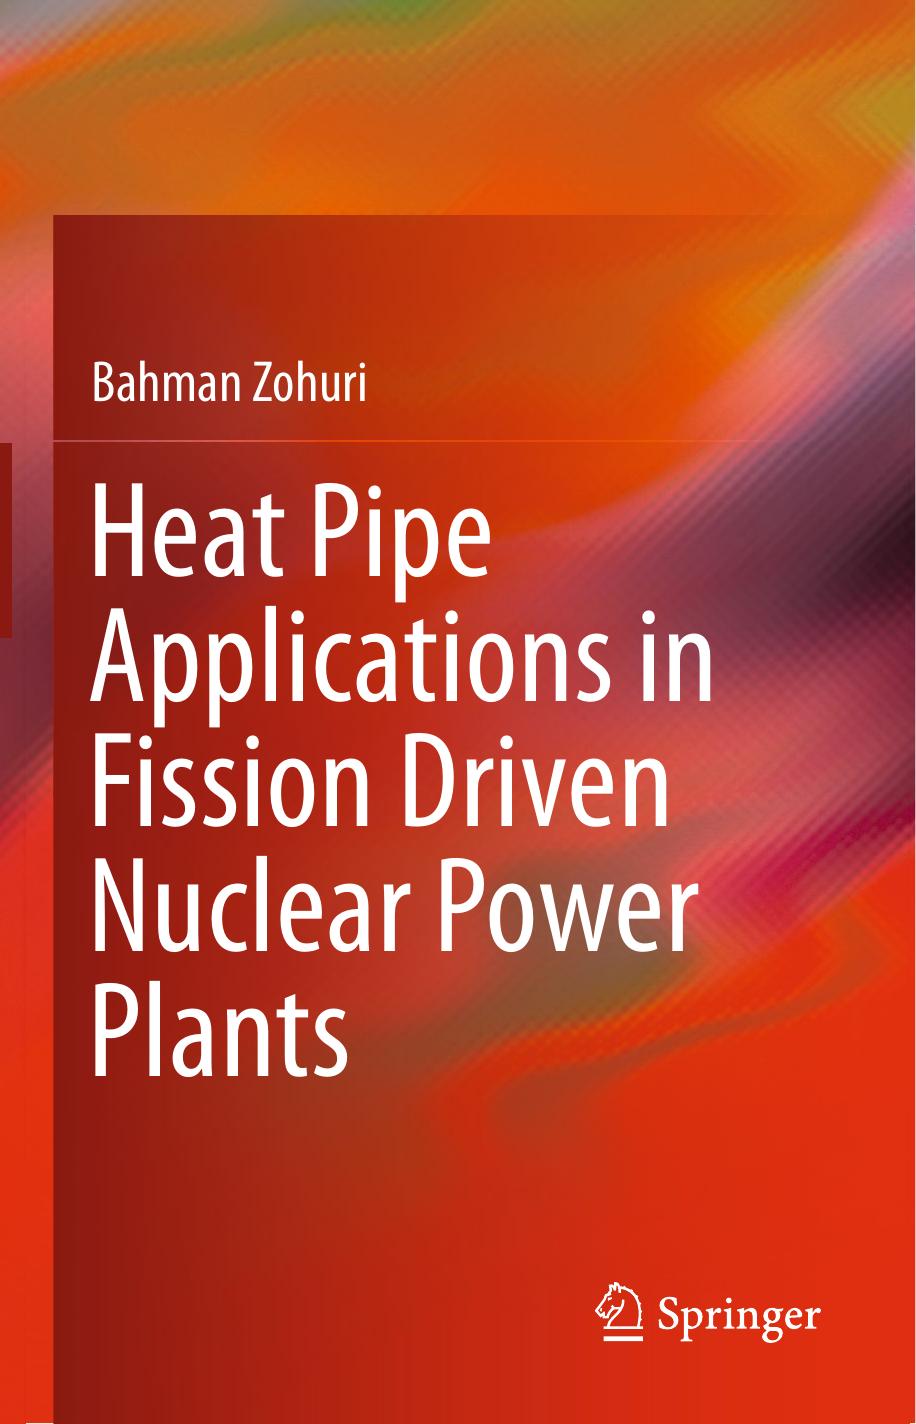 Heat Pipe Applications in Fission Driven Nuclear Power Plants by Bahman Zohuri